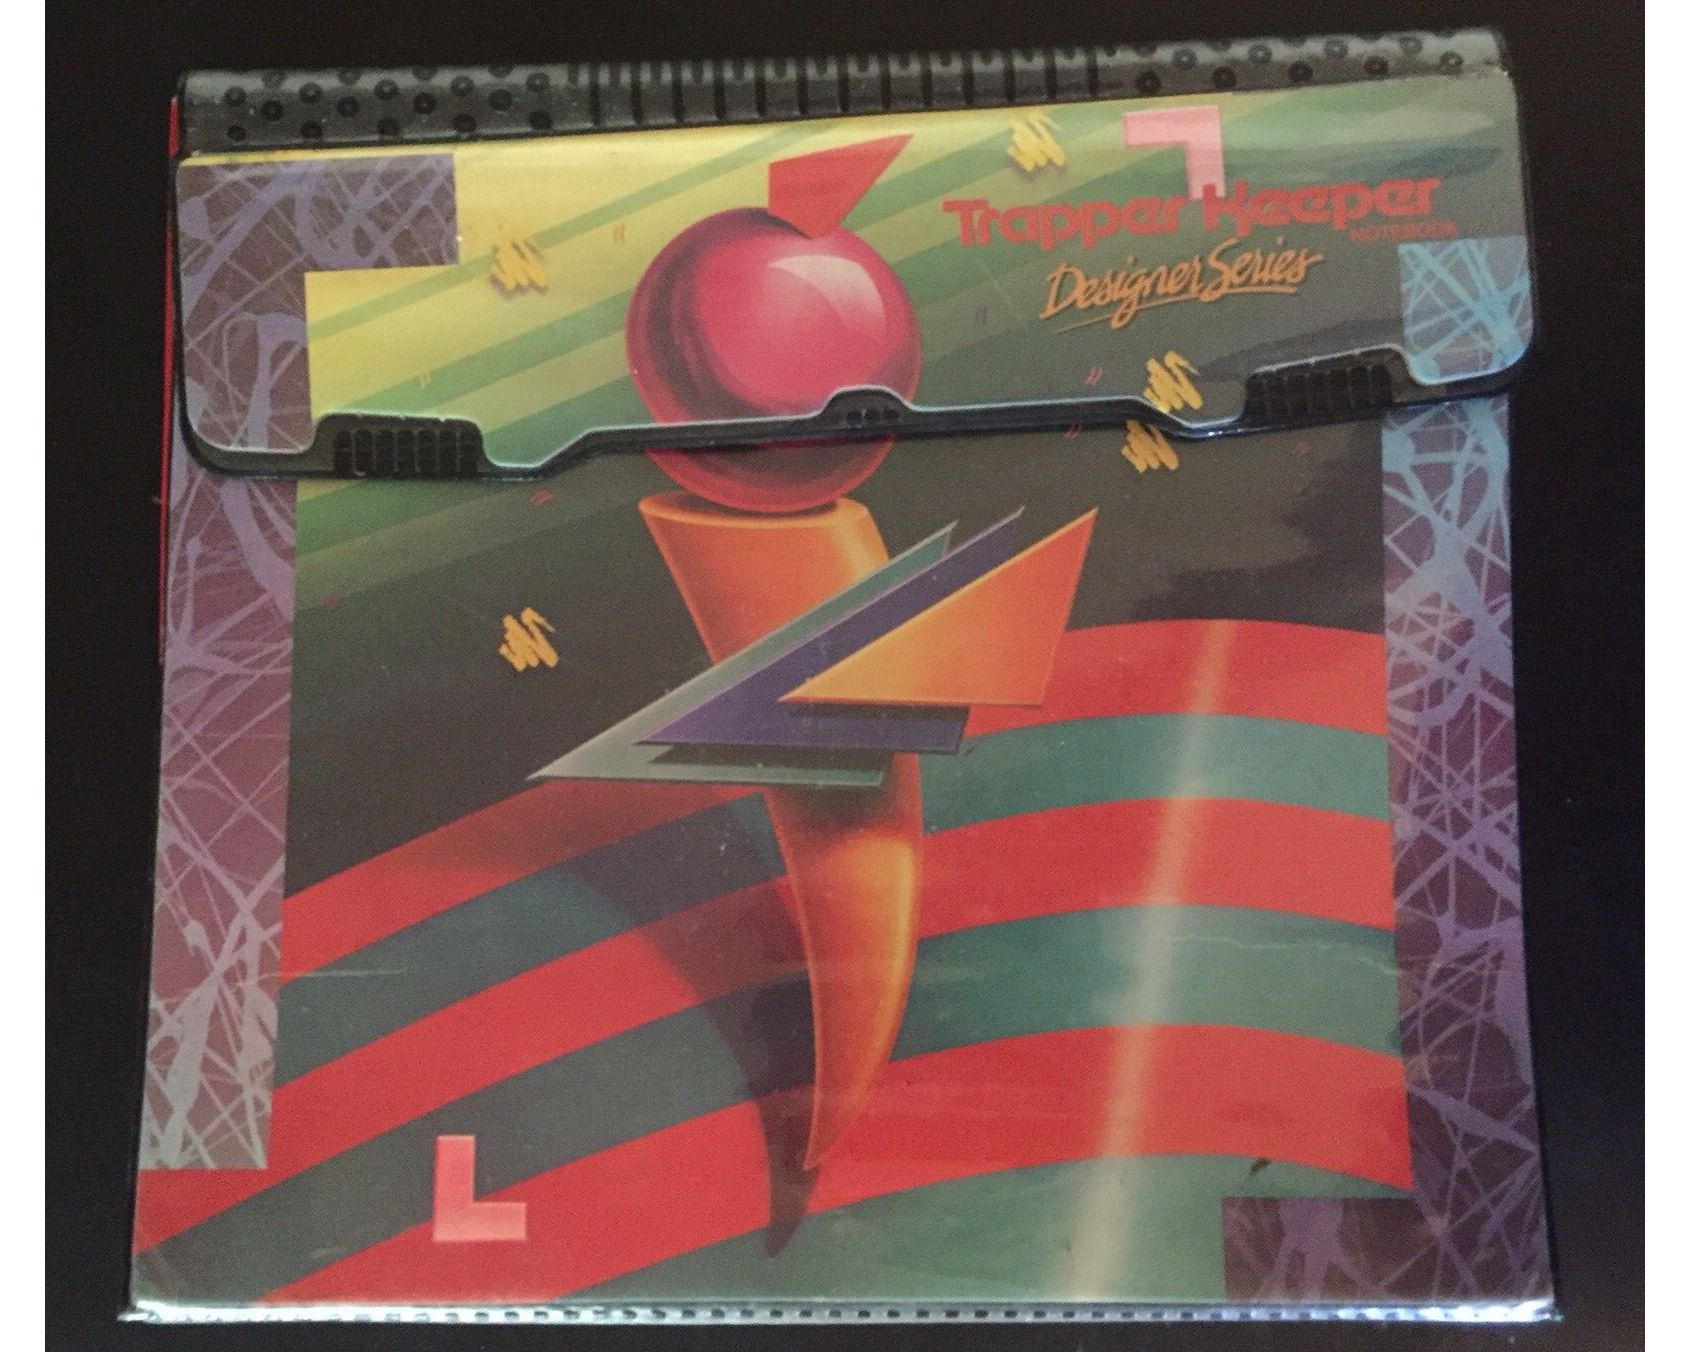 <p><a href="https://mentalfloss.com/article/52726/history-trapper-keeper">Rolled out nationwide in 1981</a>, Mead's Trapper Keeper was a runaway hit, dominating kids' back-to-school wishlists for most of the '80s and '90s. This three-ring binder with an iconic "trapper" flap on the front came in a huge number of designs and was sold practically everywhere. Sales tapered off in the new millennium, and Mead was forced to replace the largely PVC binders with safer materials. While Trapper Keepers have been produced sporadically in recent years, they've largely been supplanted by Mead's Five Star binders. Gotta have the real deal? You can find <a href="https://www.ebay.com/sch/i.html?_from=R40&_trksid=p2540003.m570.l1313&_nkw=trapper+keepers&_sacat=0">vintage versions on eBay</a>.</p>